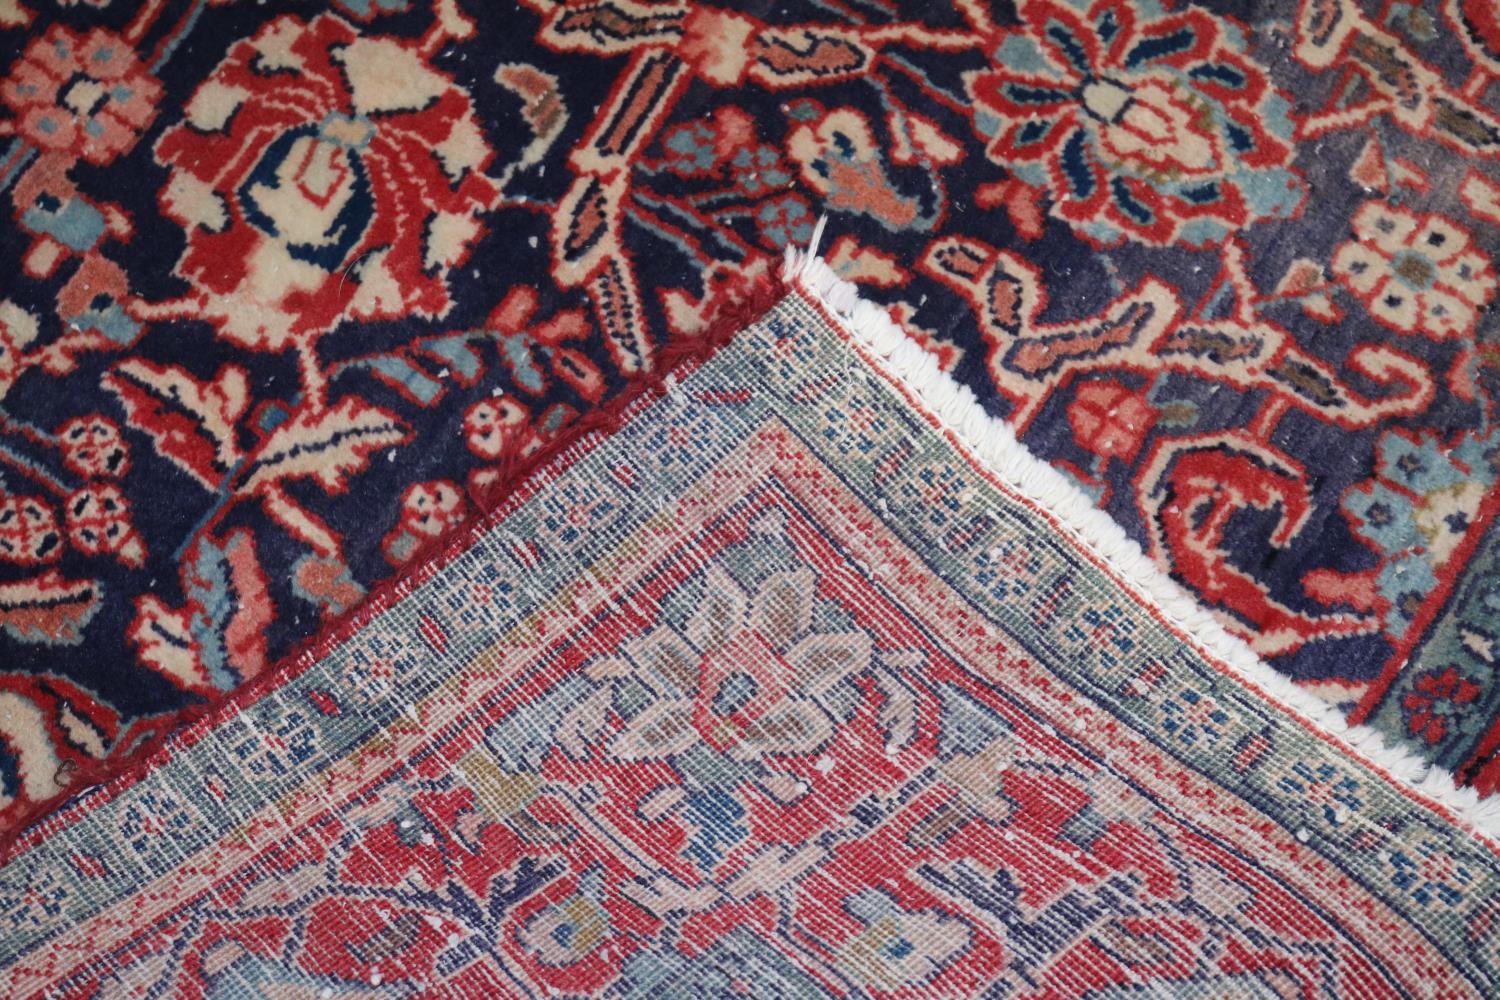 Good quality Red Ground Rug with central medallion 165cm in Length - Image 2 of 2